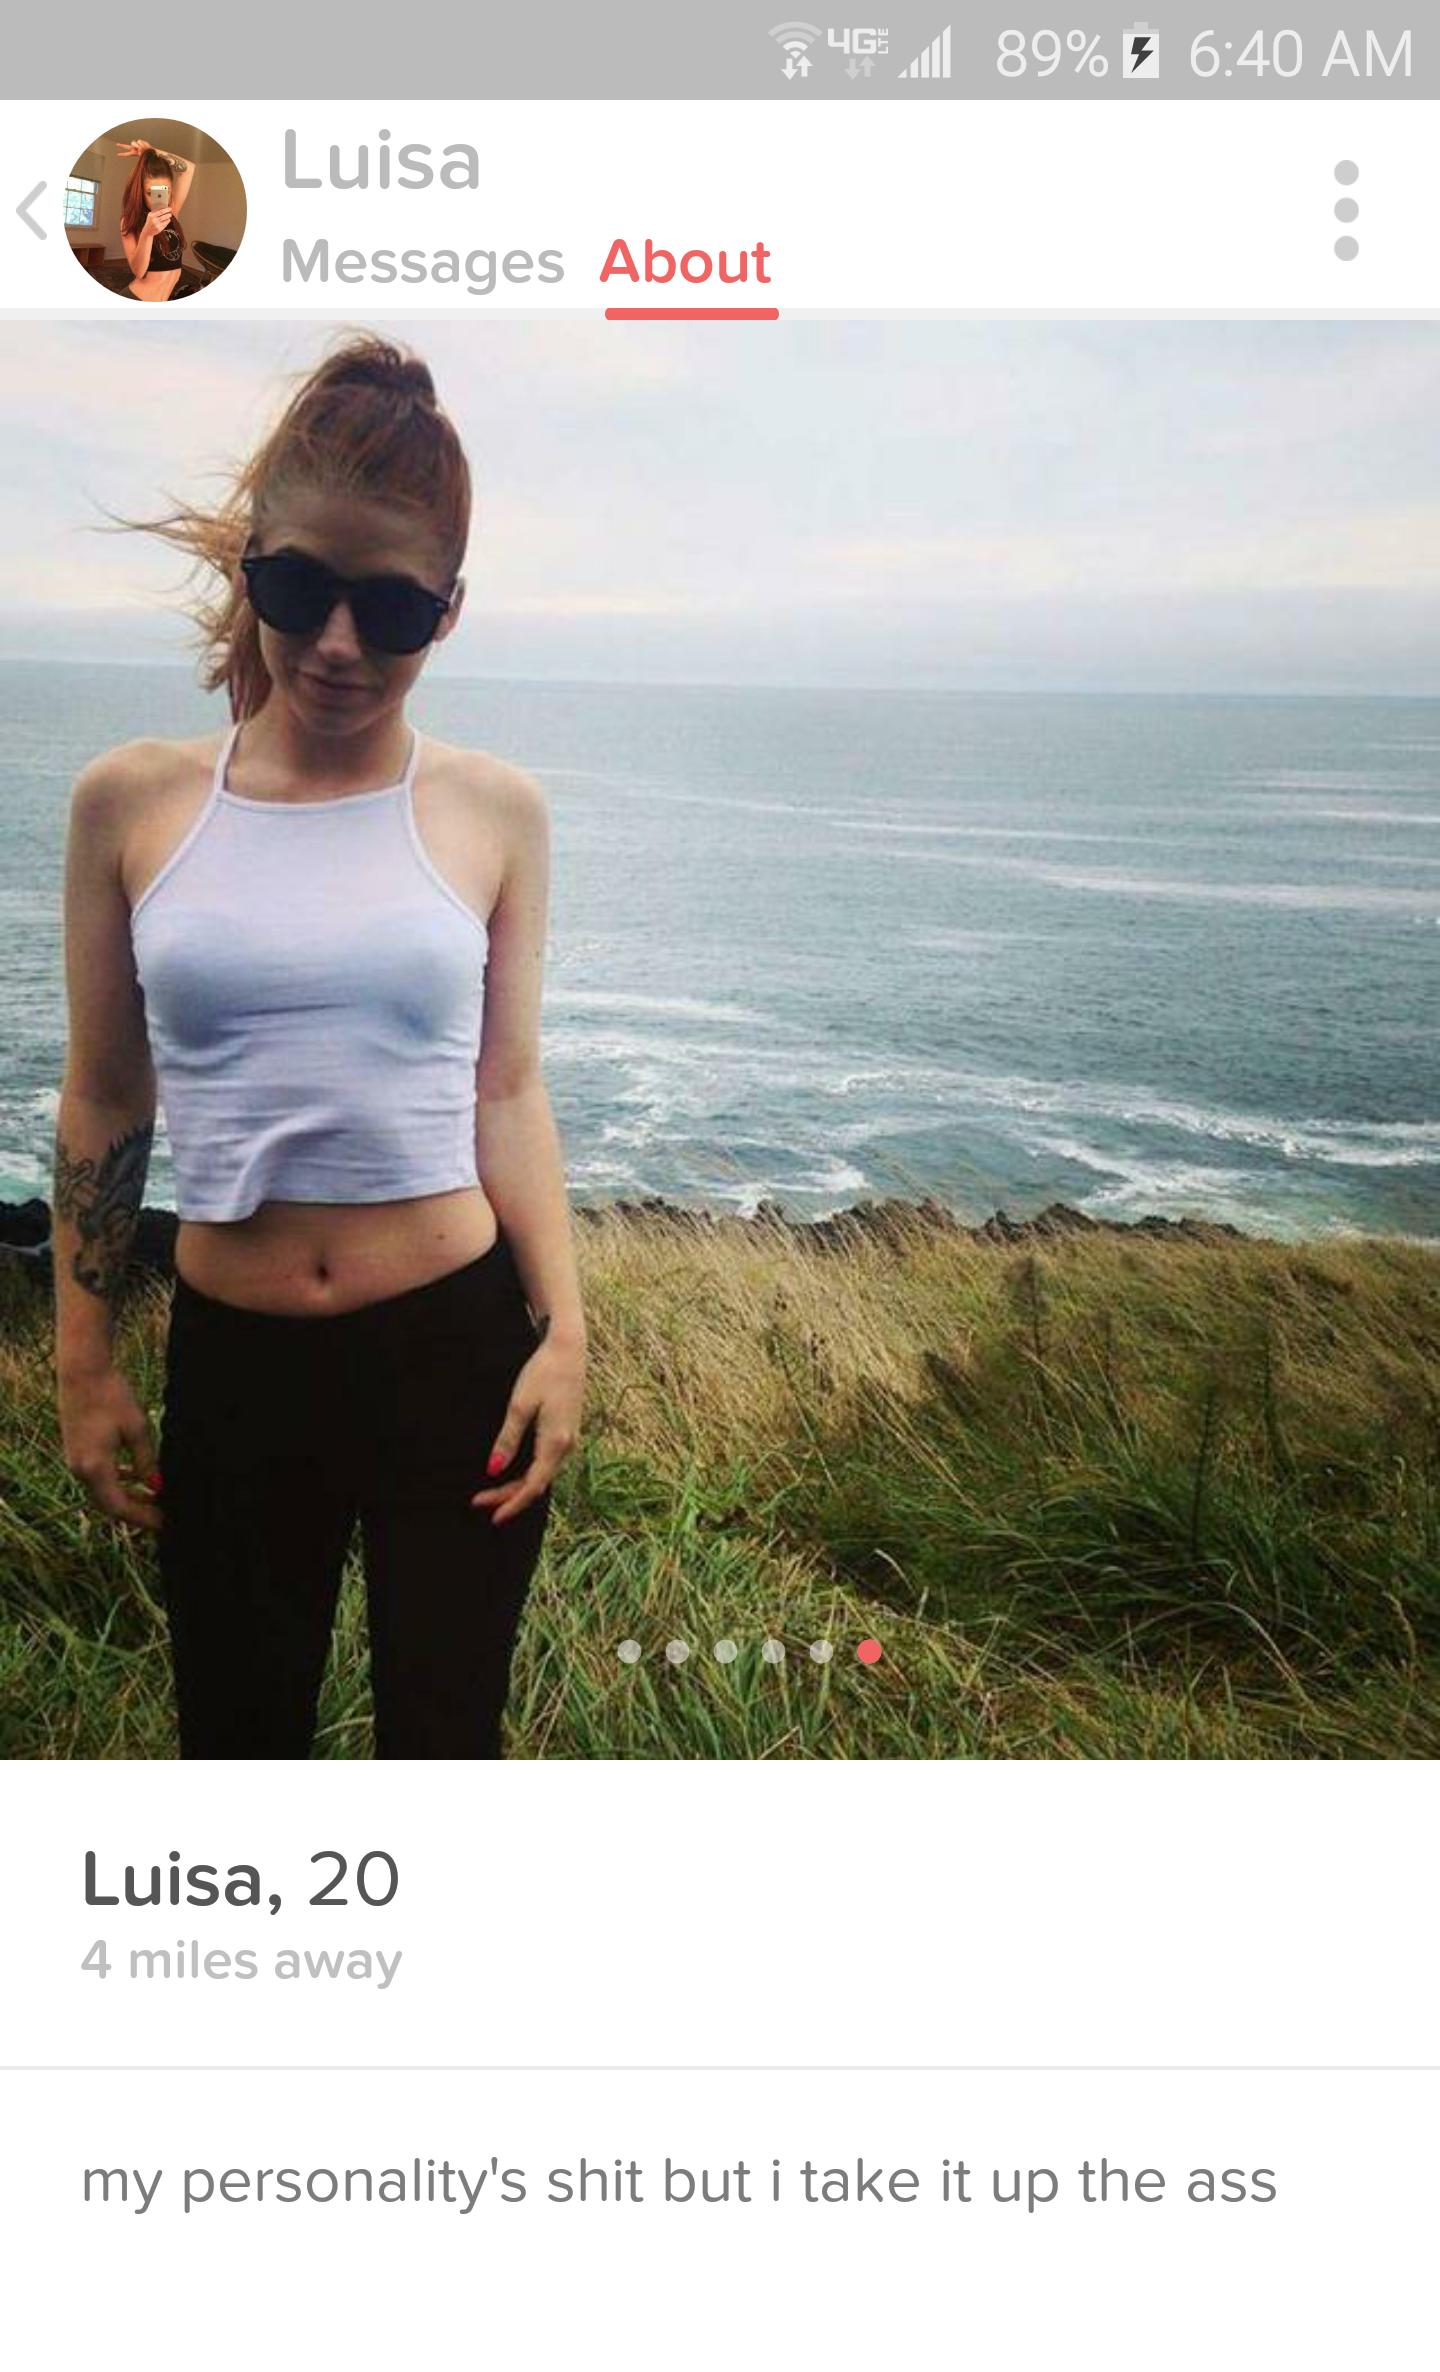 best tinder - 461 89% Luisa Messages About Luisa, 20 4 miles away my personality's shit but i take it up the ass